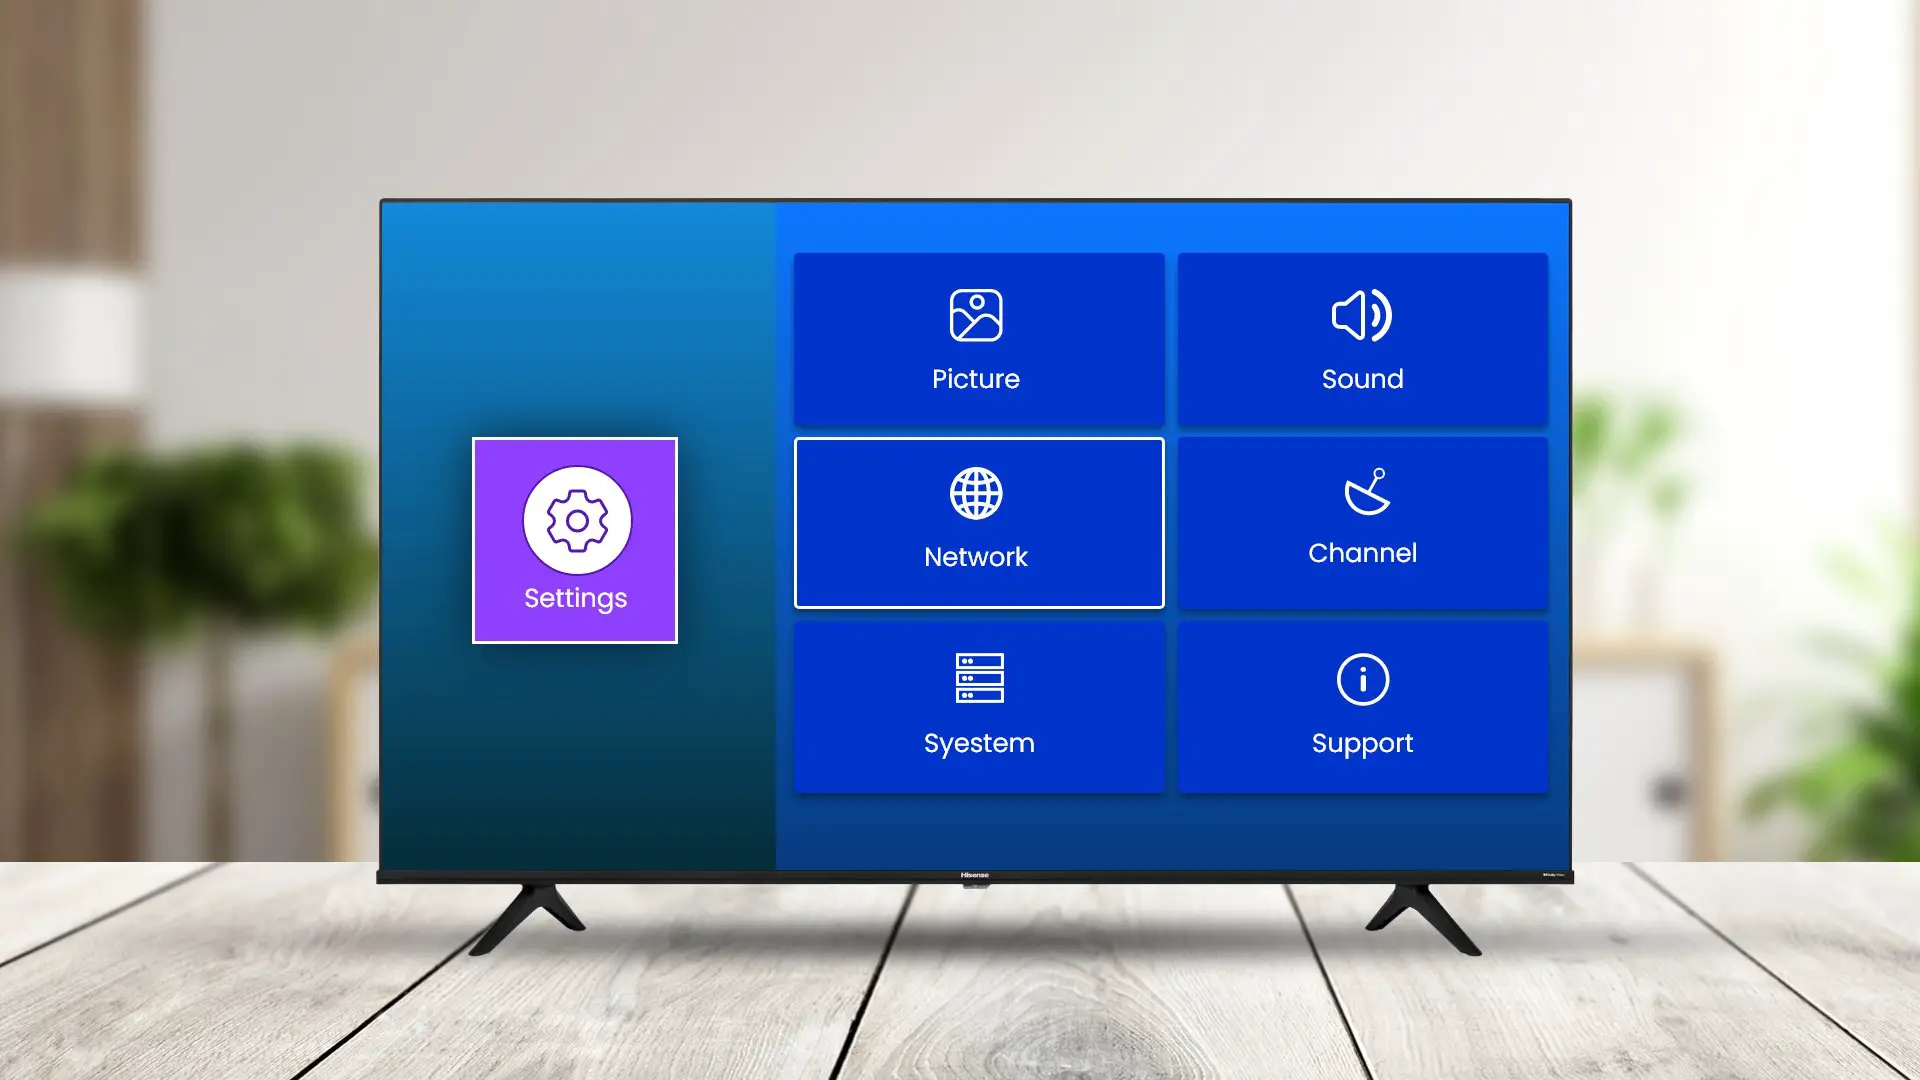 How to connect Hisense TV to WiFi - Steps